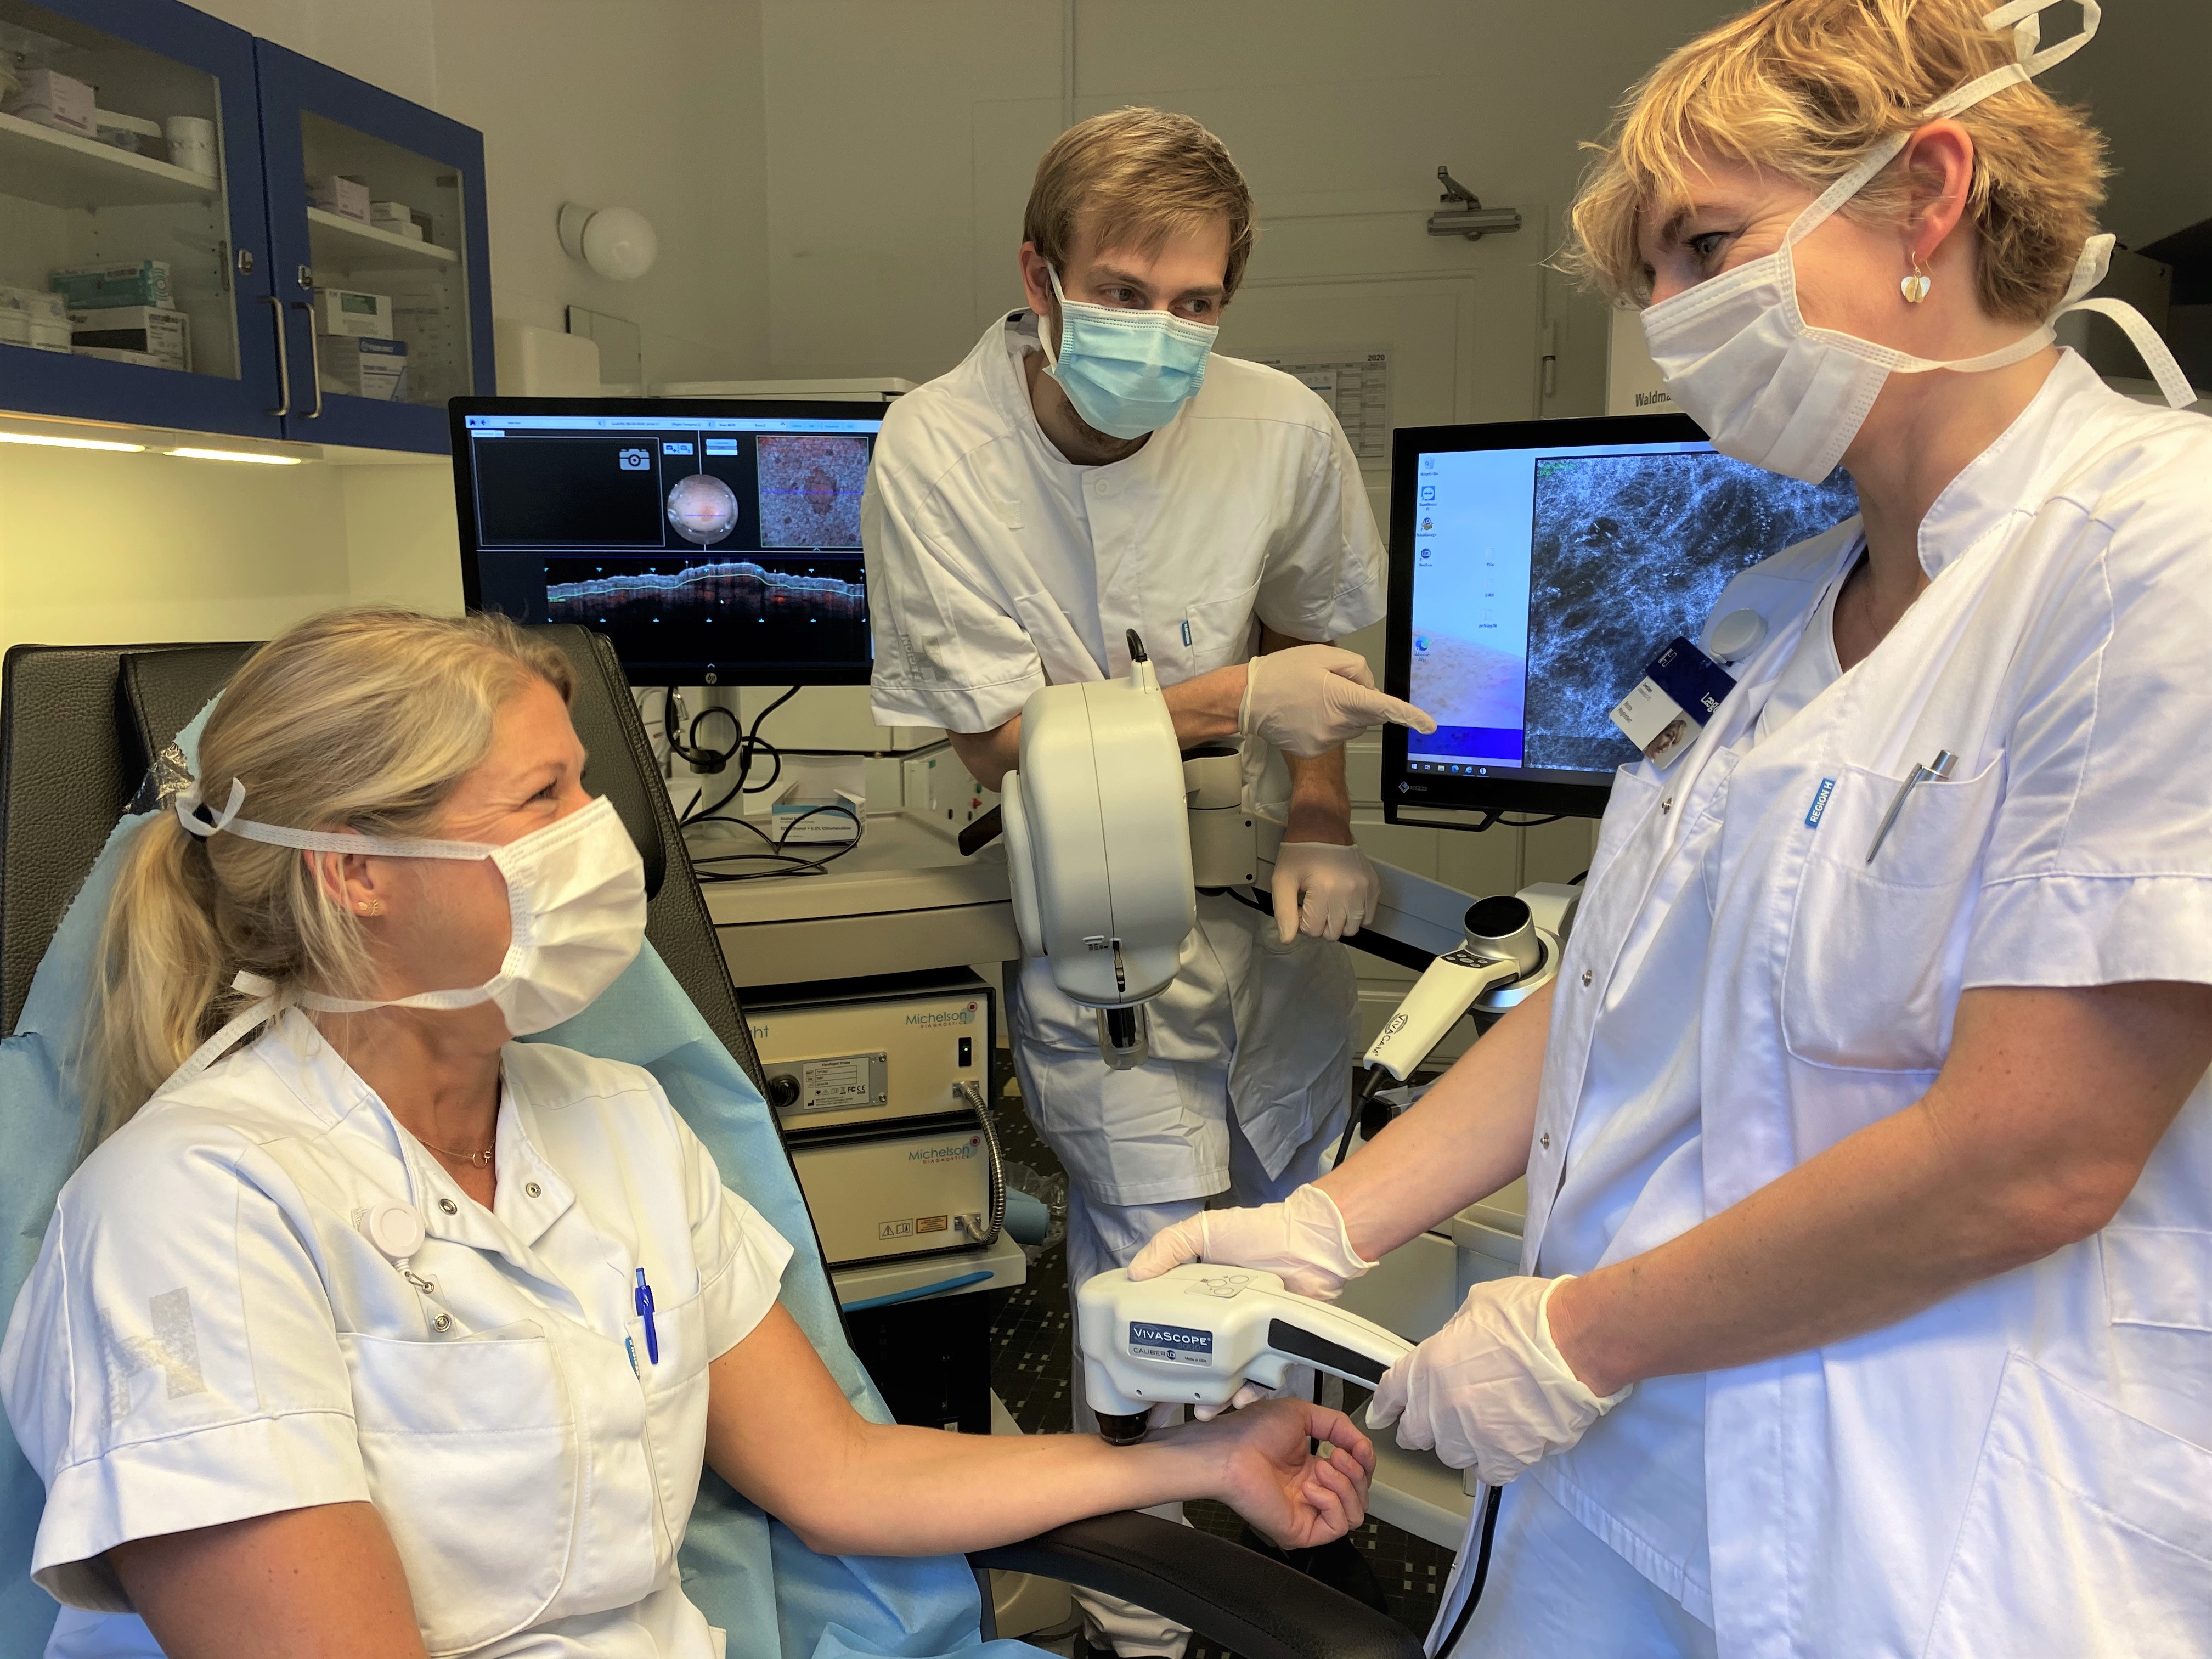 Chief physician and clinical associate professor at the Department of Dermatology at Bispebjerg Hospital Mette Mogensen (right) works with DTU Fotonik researcher Niels Møller Israelsen (center) to provide faster cancer diagnoses using imaging. Here, one of the Department of Dermatology's research nurses is being scanned.